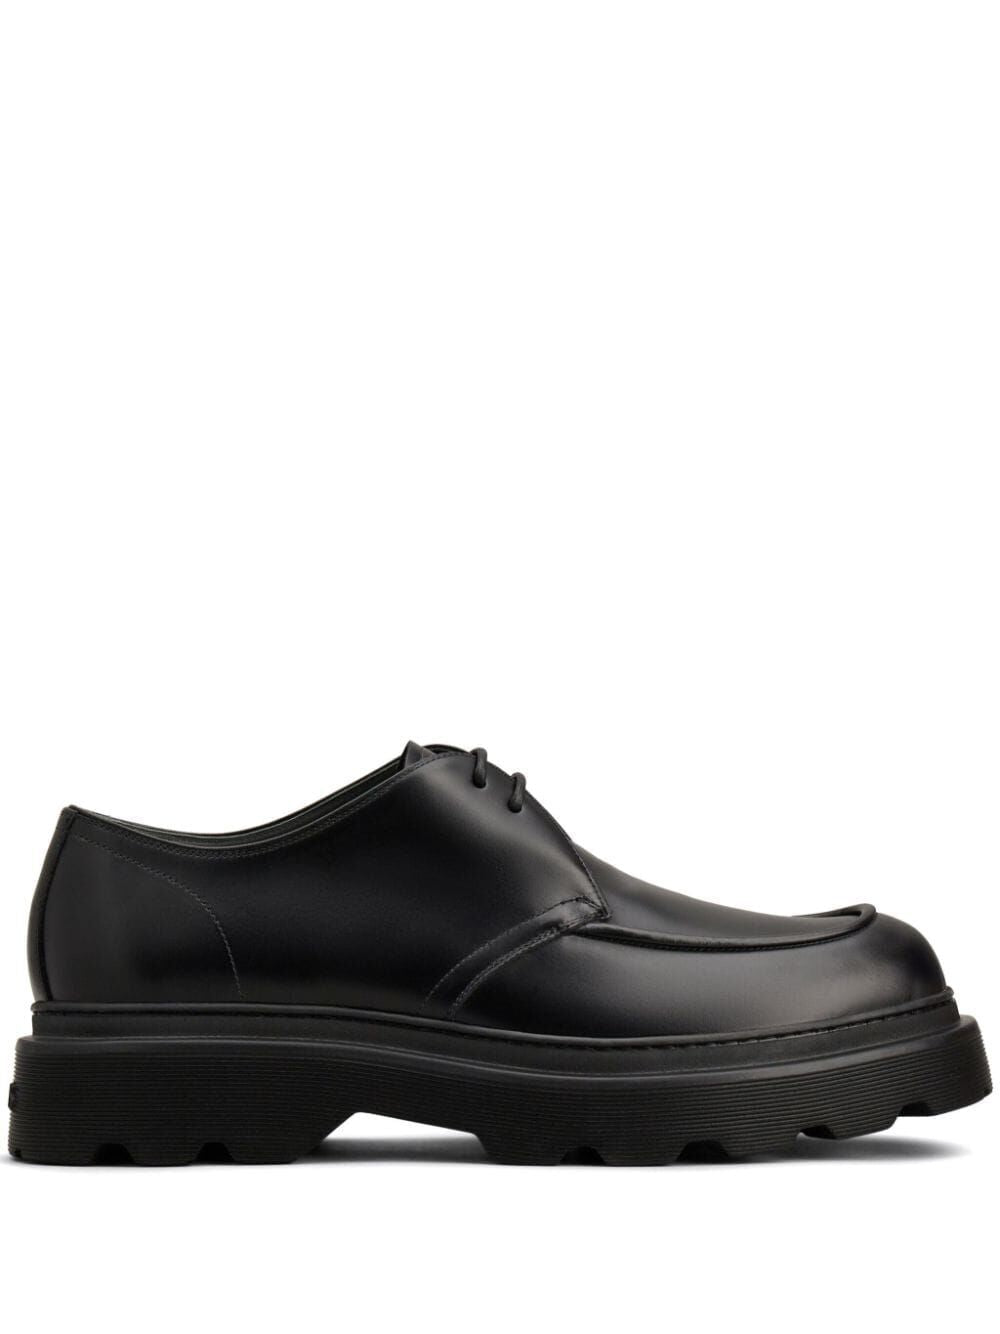 TOD'S LACEUP LEATHER Derby Dress Shoes SHOES